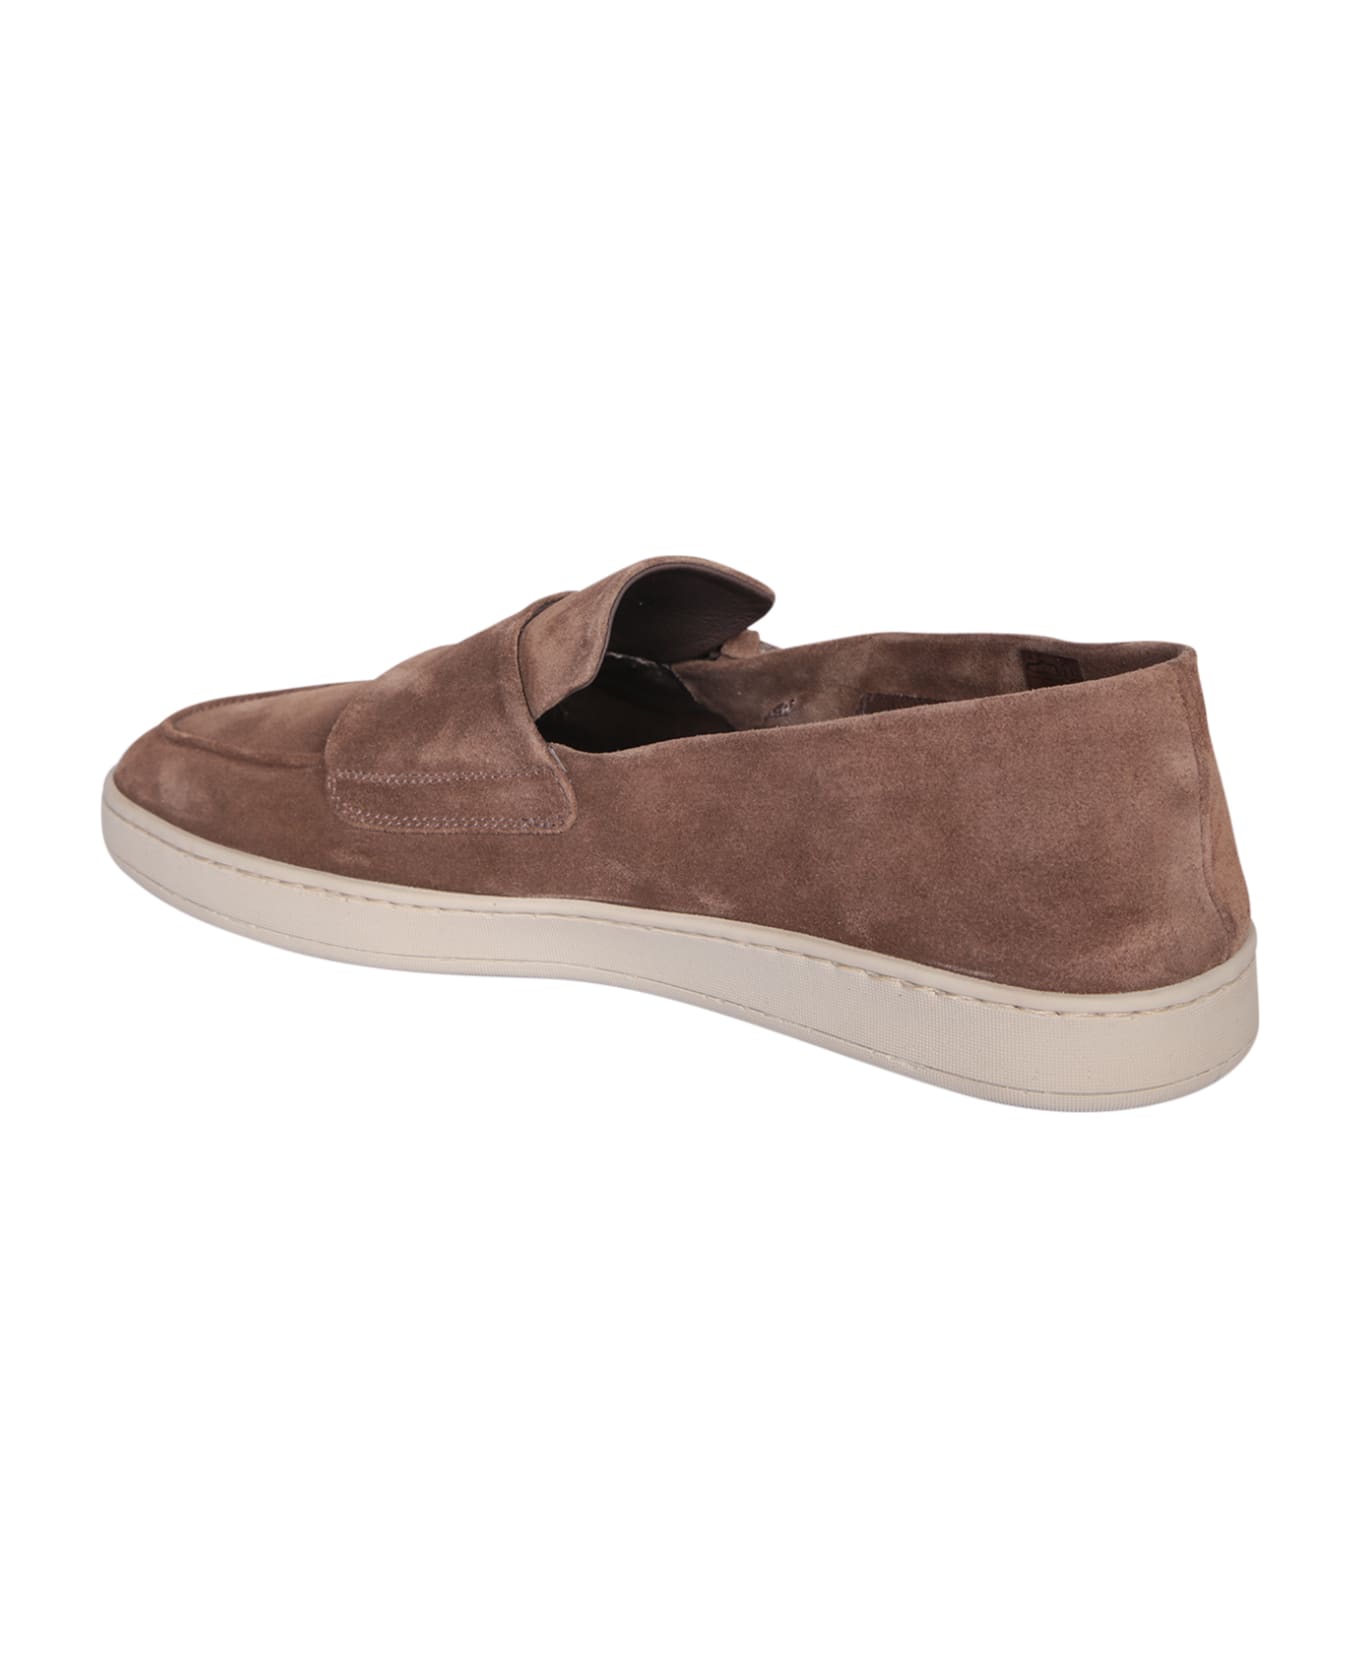 Officine Creative Herbie 005 Suede Taupe Loafer - Brown